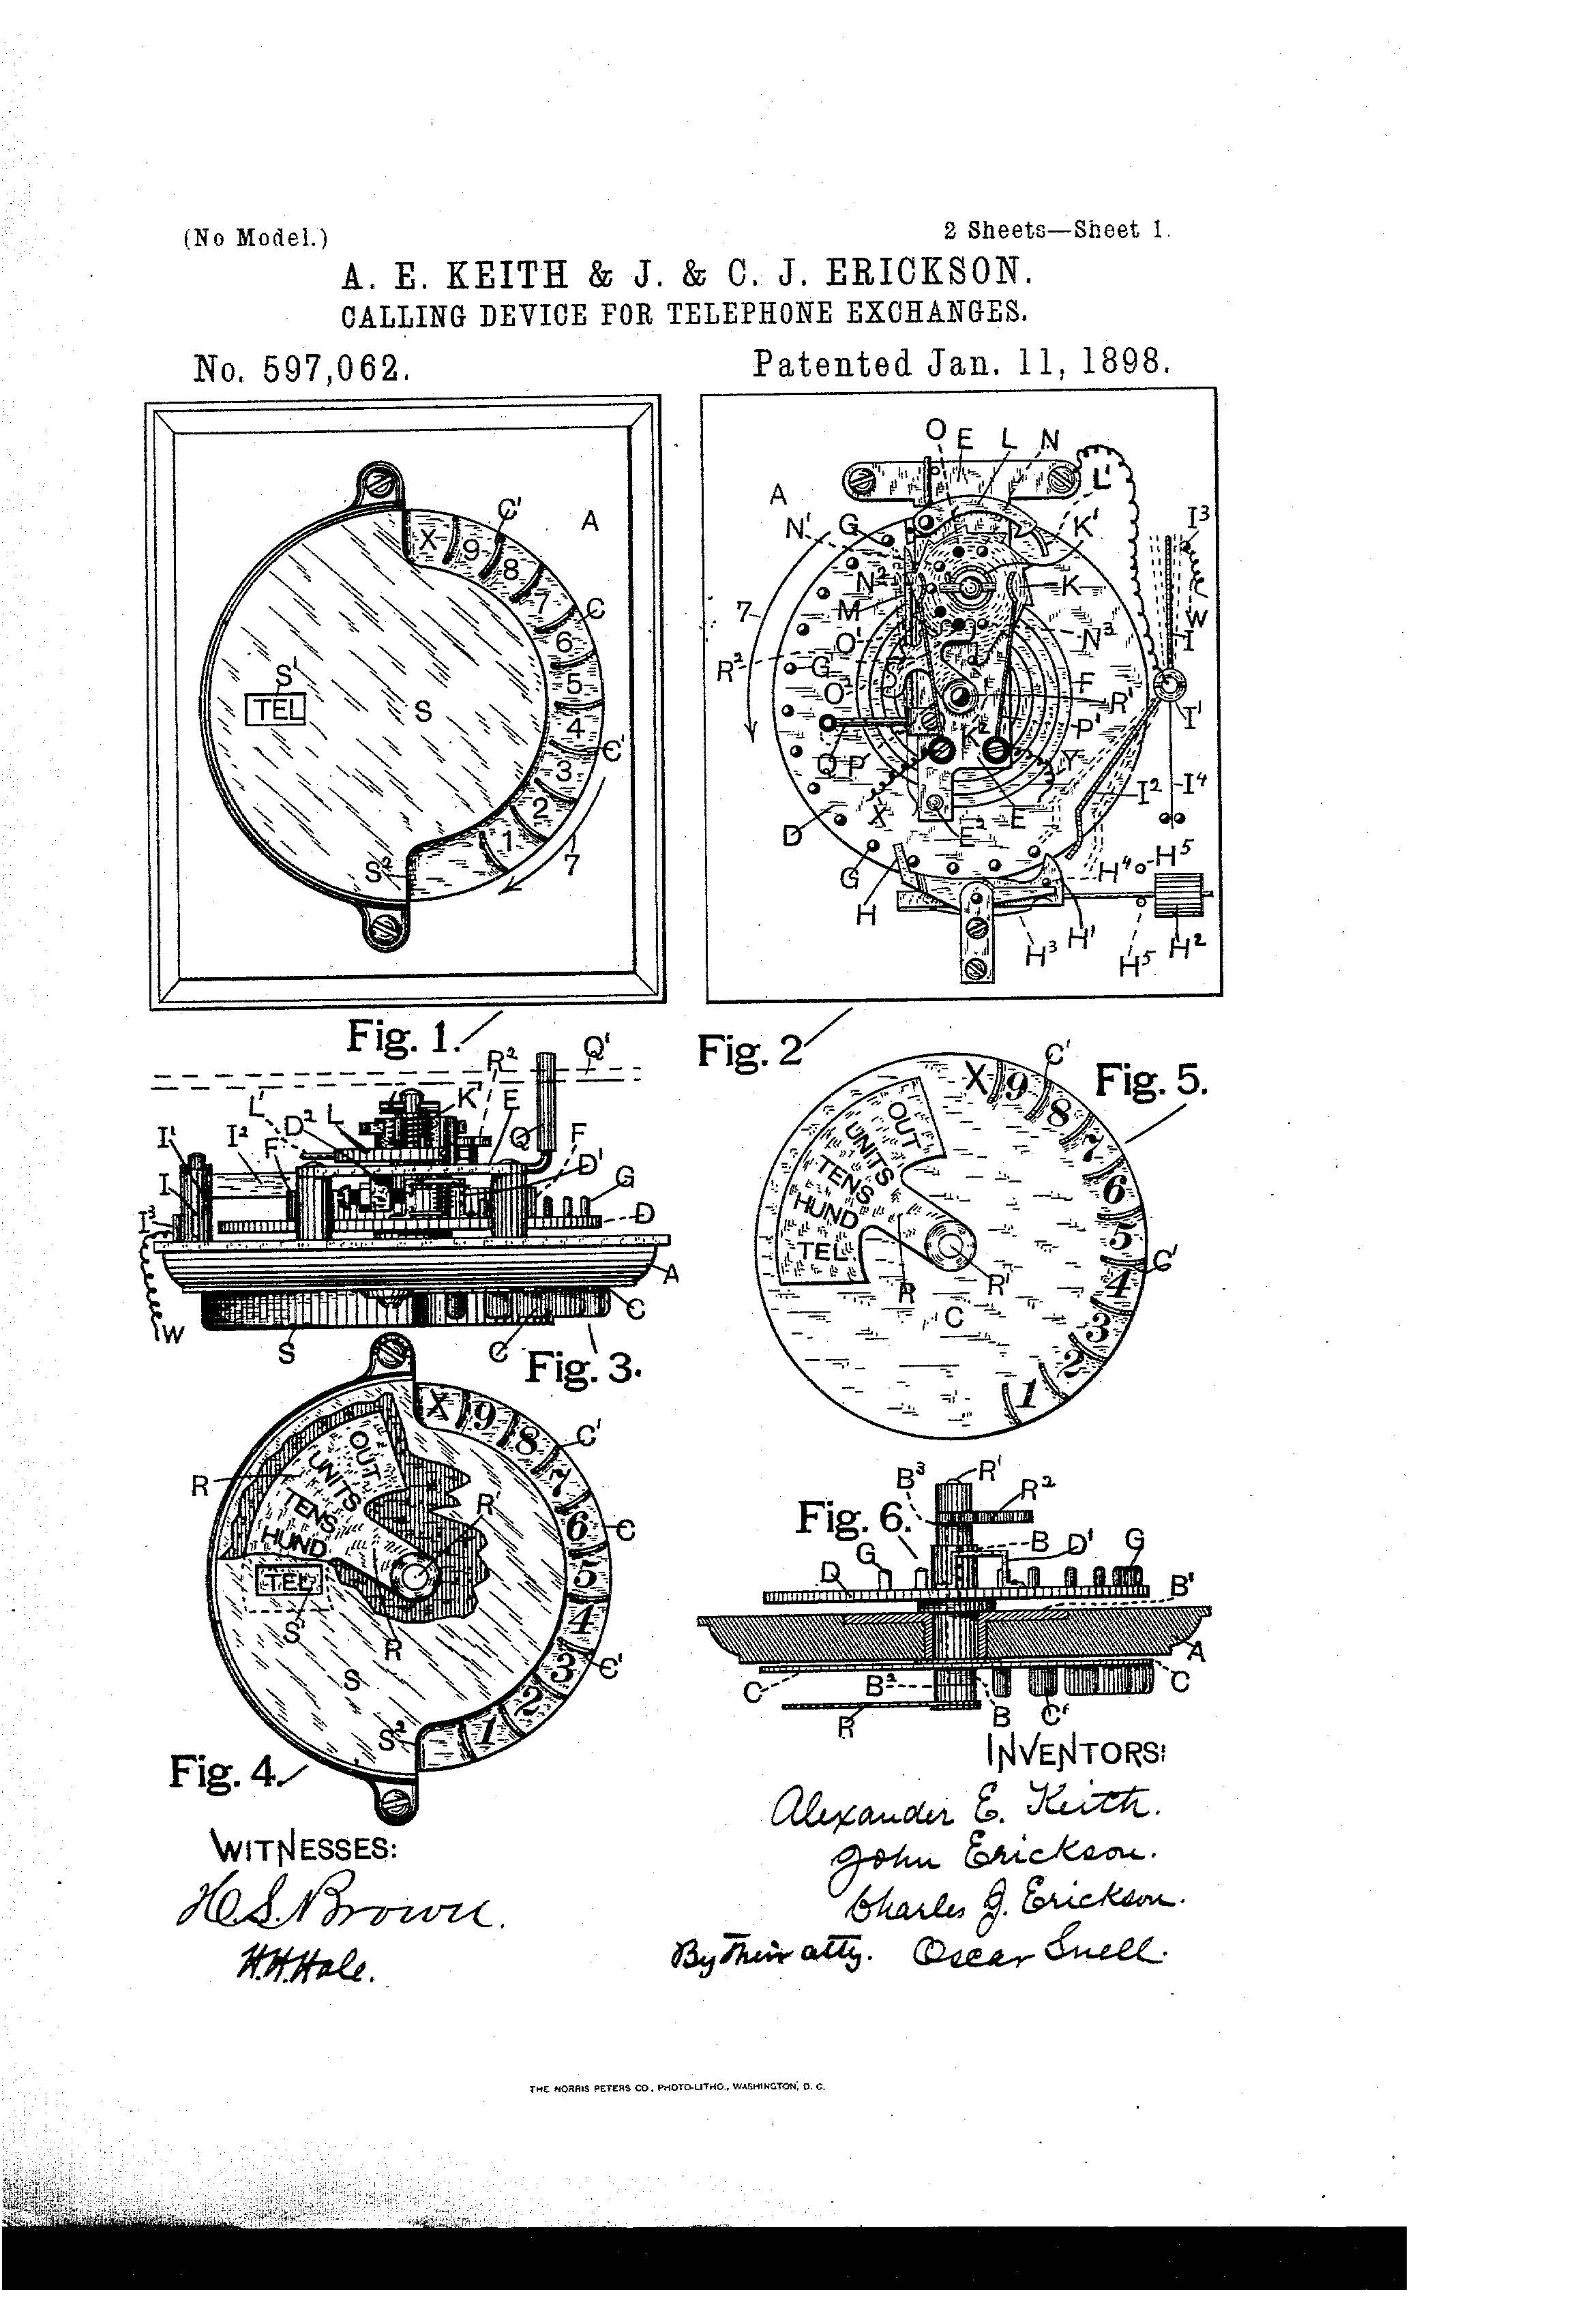 Patent-Illustration-Calling-Device-for-Telephone-Exchanges_Page_1